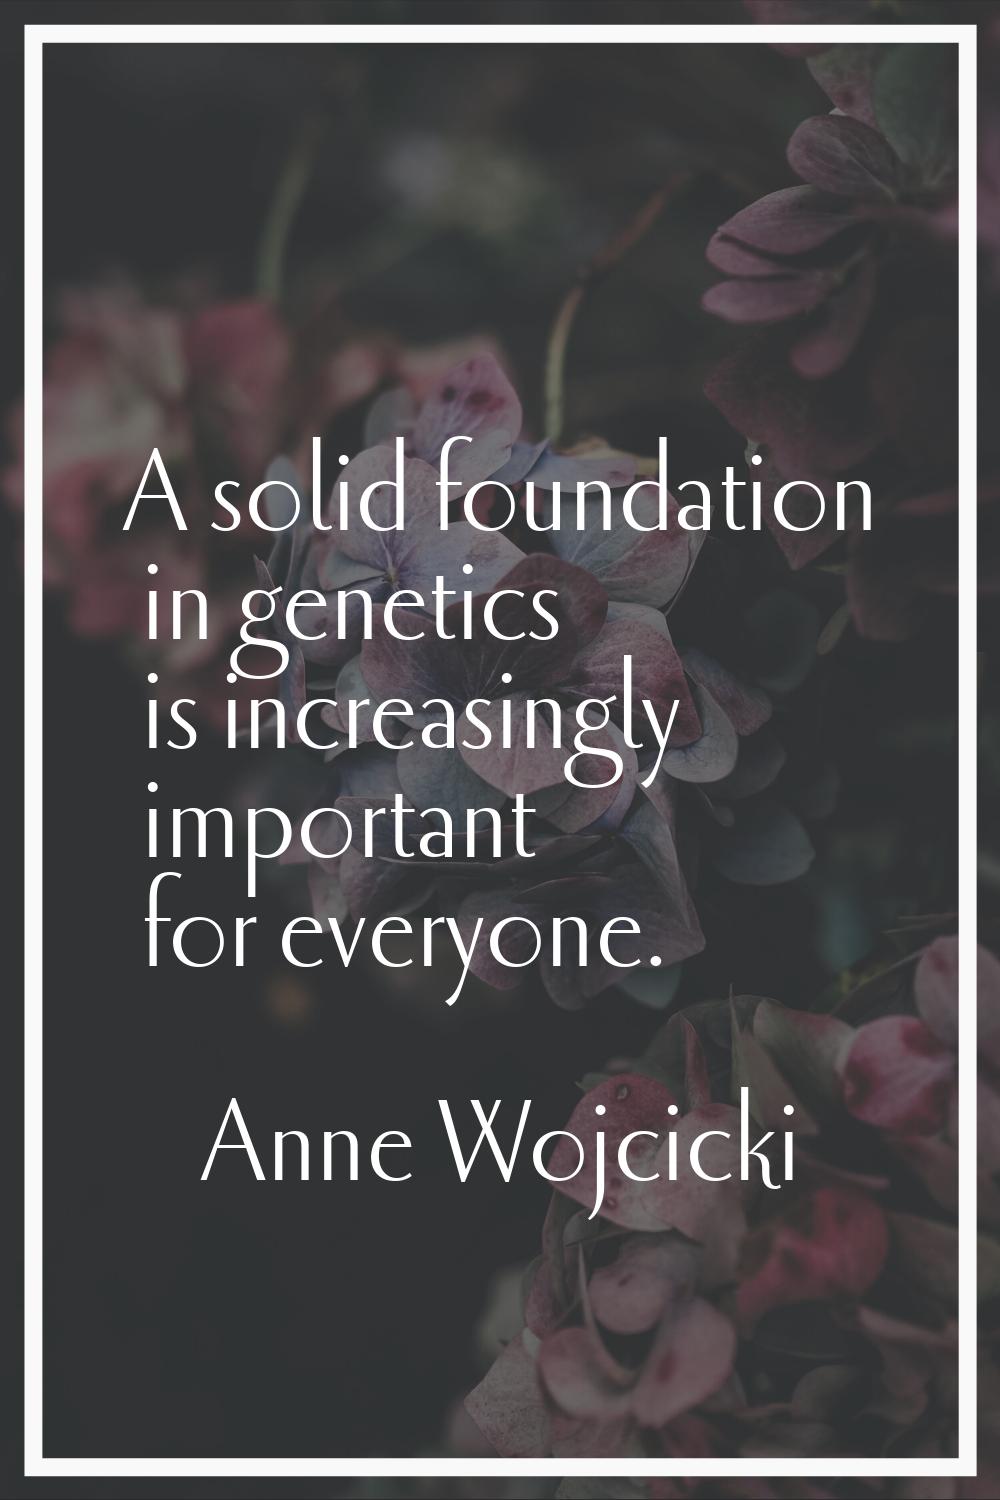 A solid foundation in genetics is increasingly important for everyone.